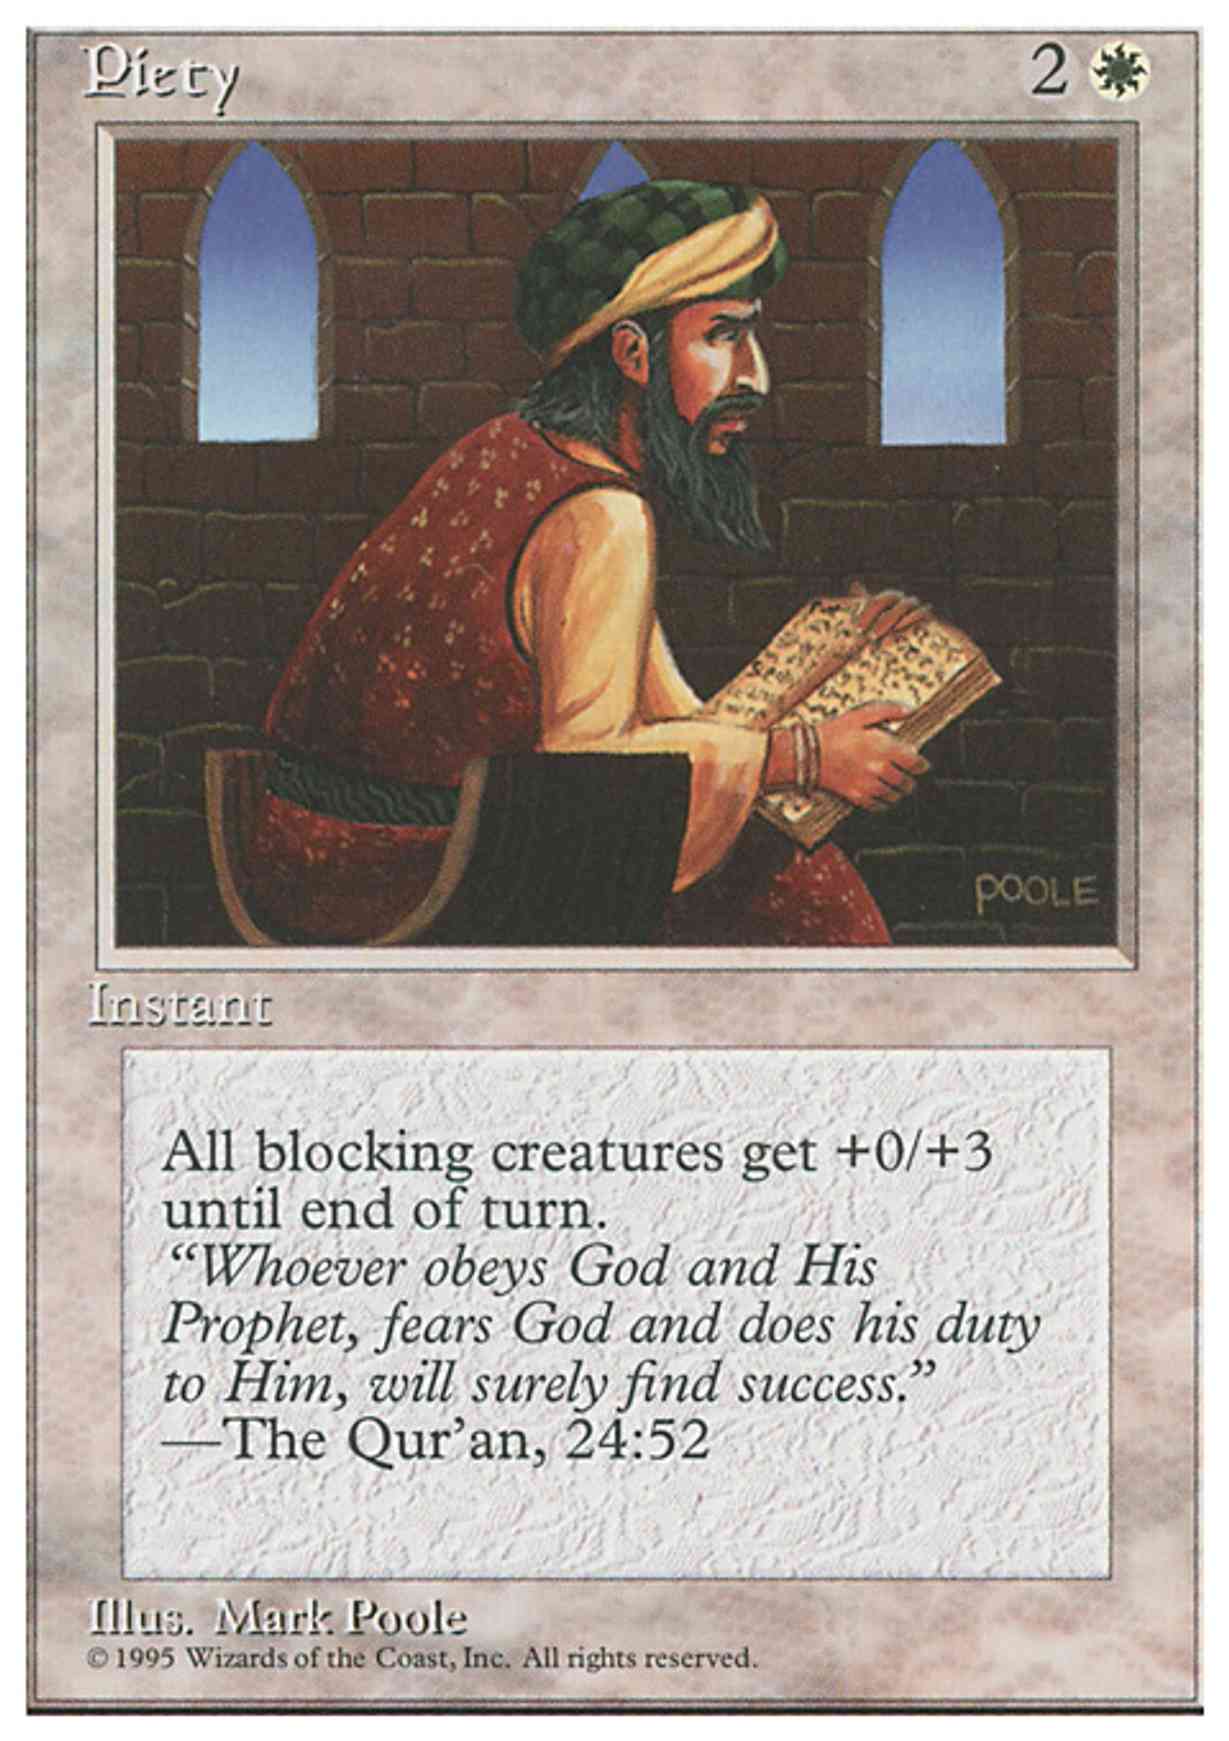 Piety magic card front